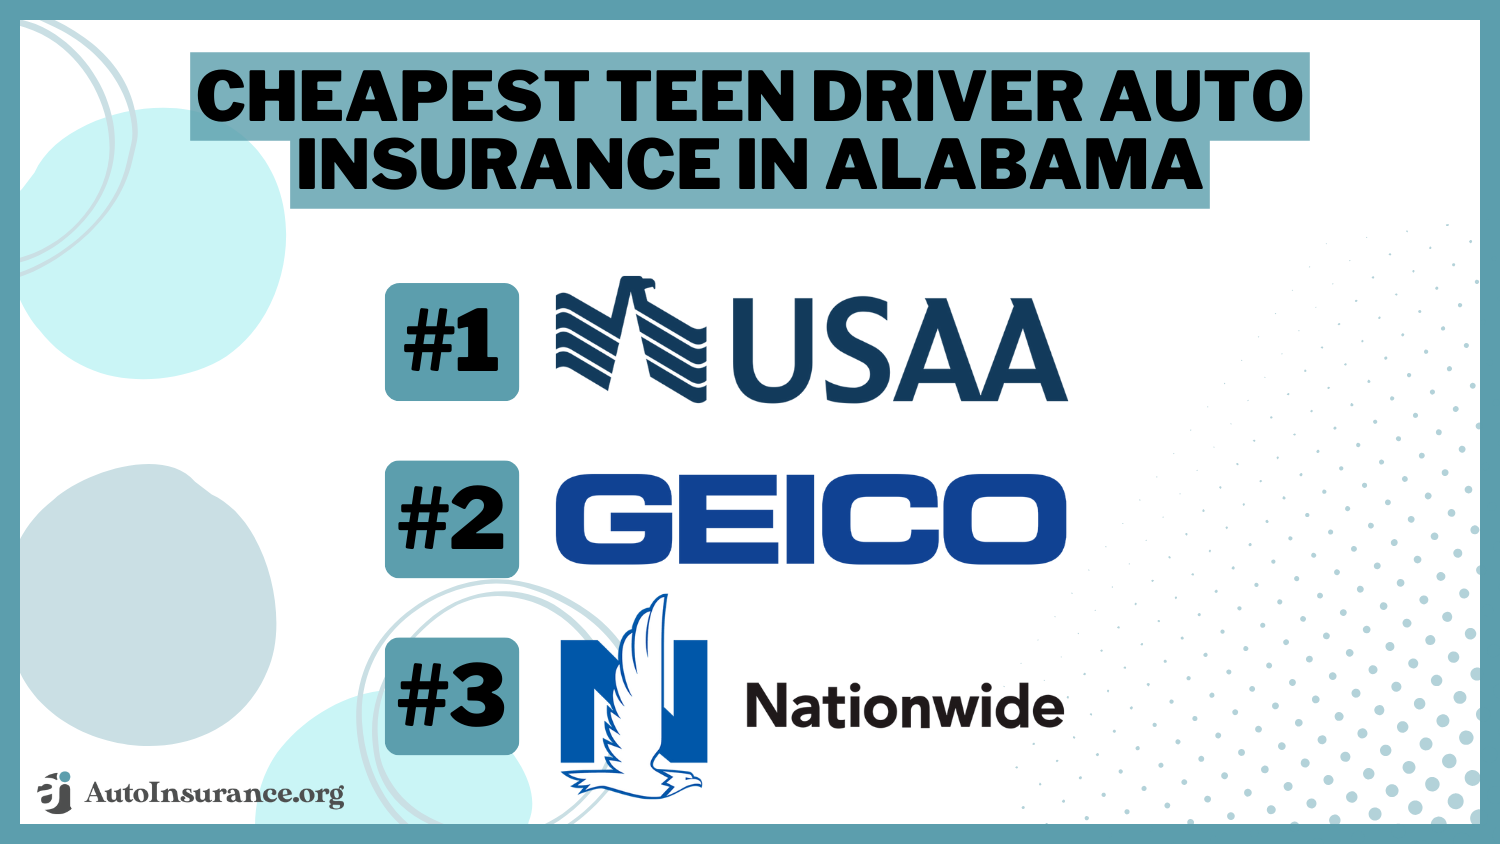 Cheapest Teen Driver Auto Insurance in Alabama: USAA, Geico, Nationwide